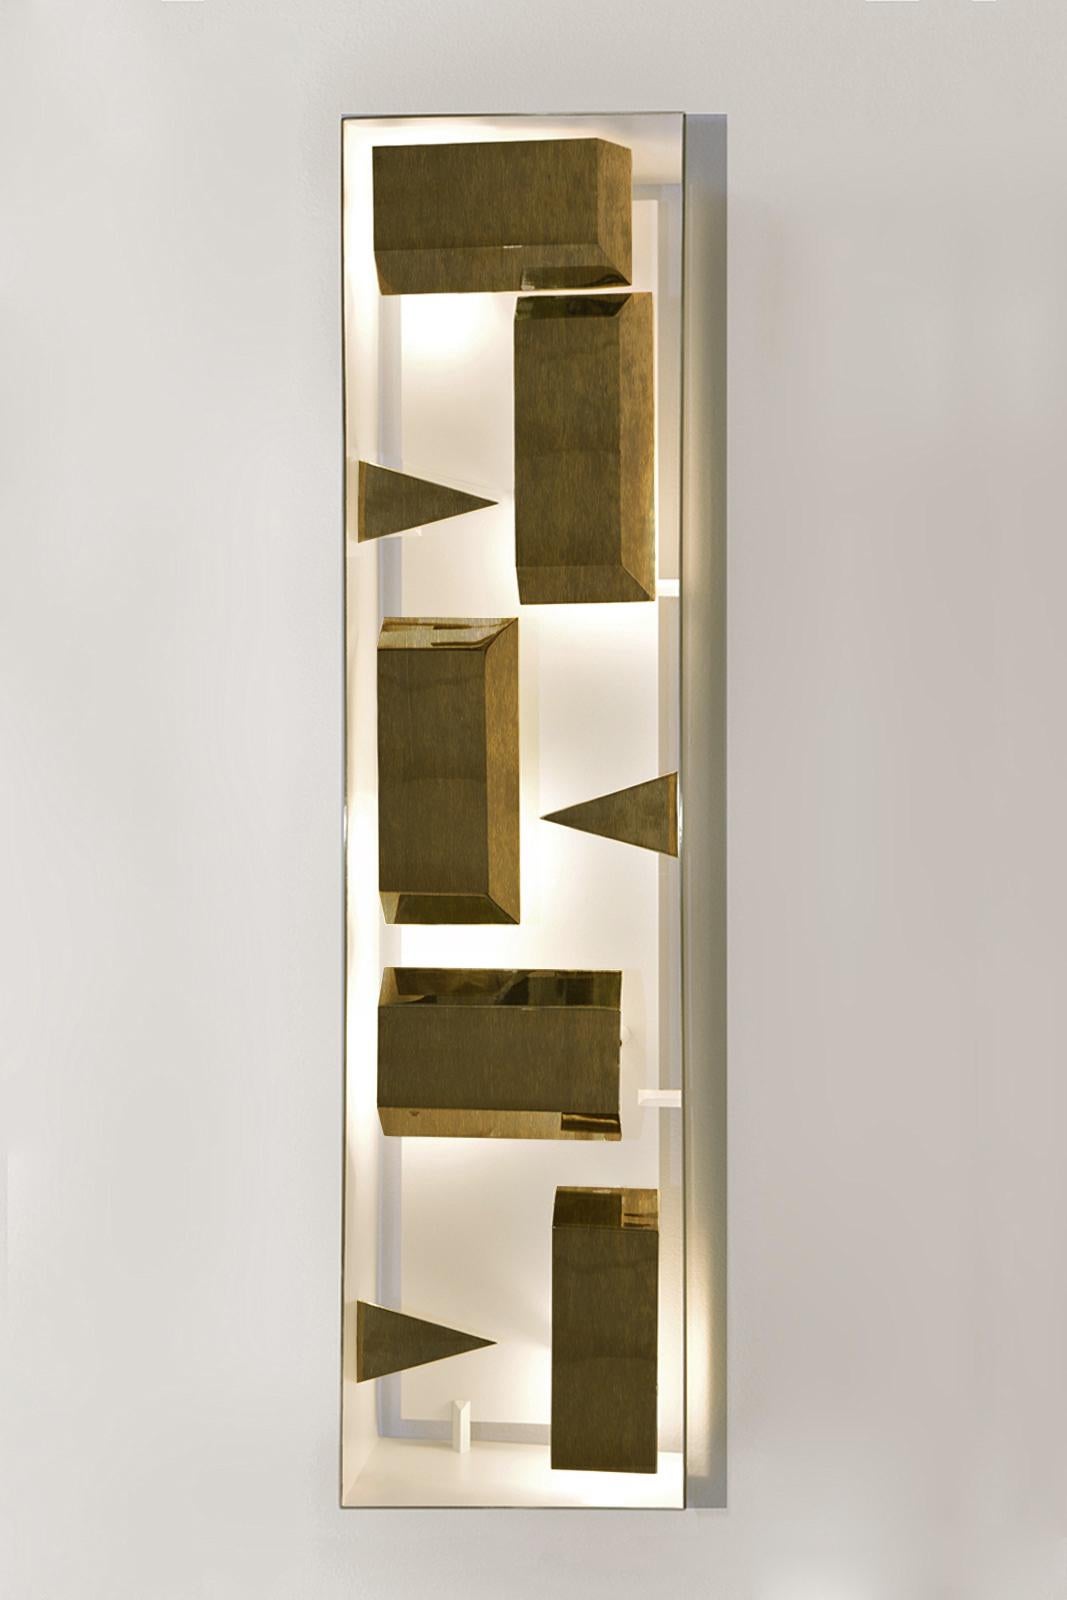 Wall lamp rectangular 'Screen of Light' designed by Gio Ponti limited edition 2012-2017 not treated brass

Wall sculpture light, wall sconce in polished not treated brass, a lamp of timeless iconic design. Handcrafted product, realized by Pollice